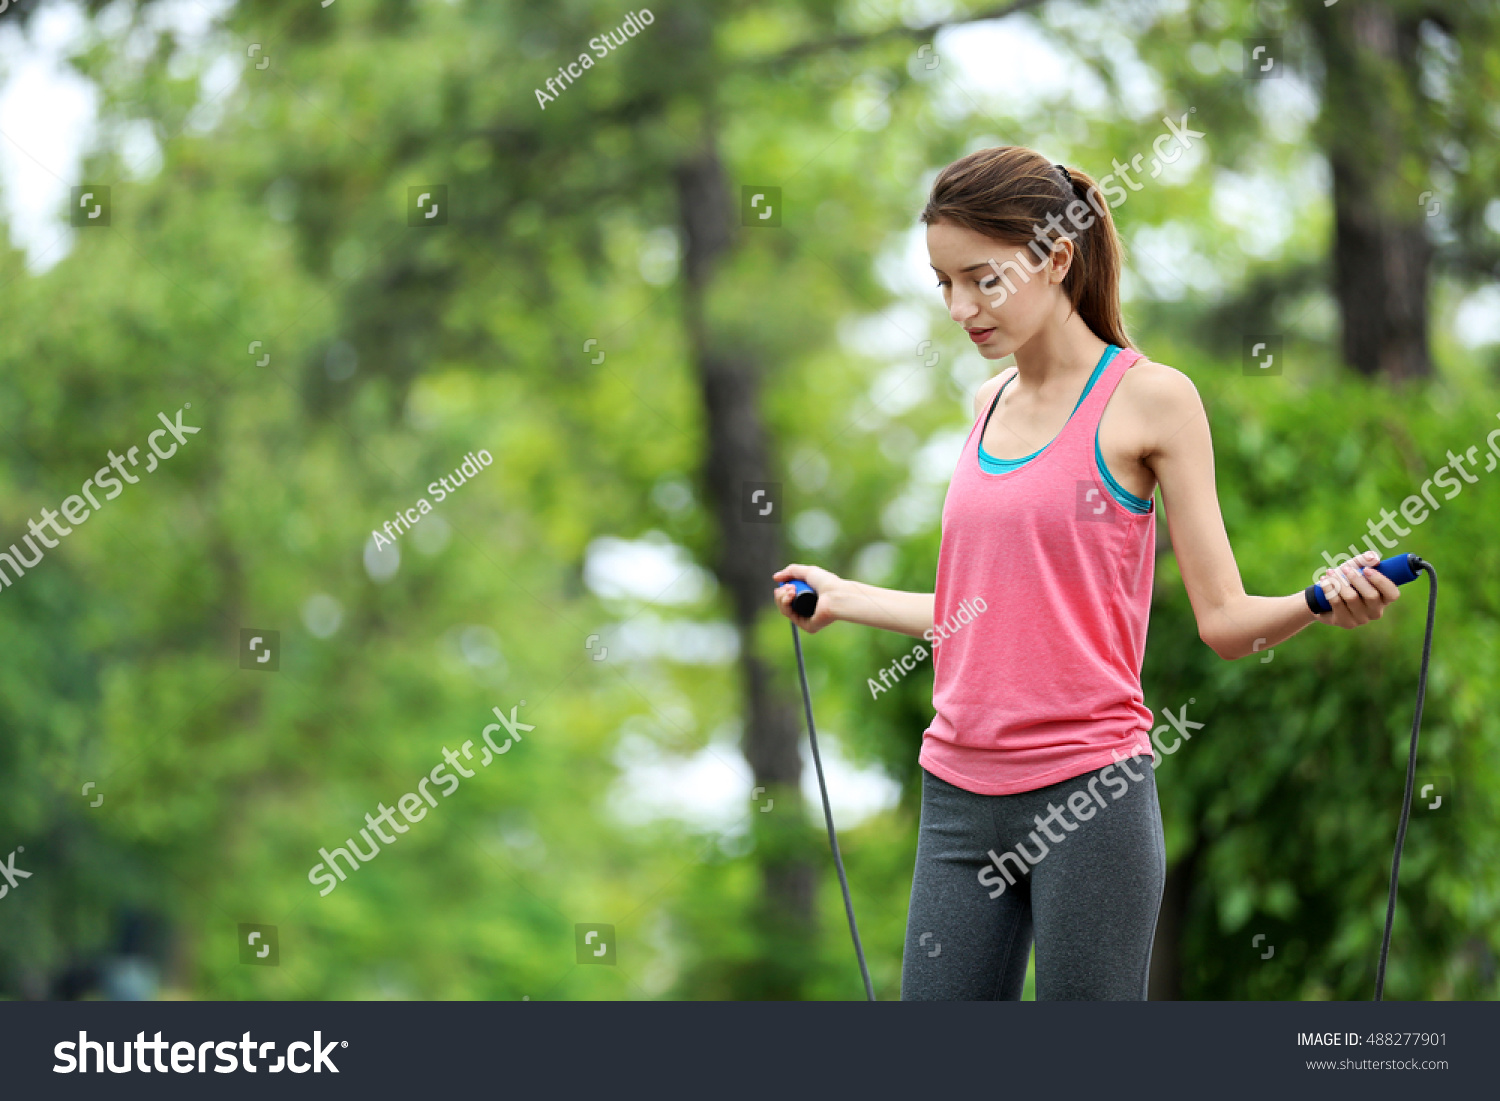 stock-photo-young-woman-with-skipping-rope-in-park-488277901.jpg